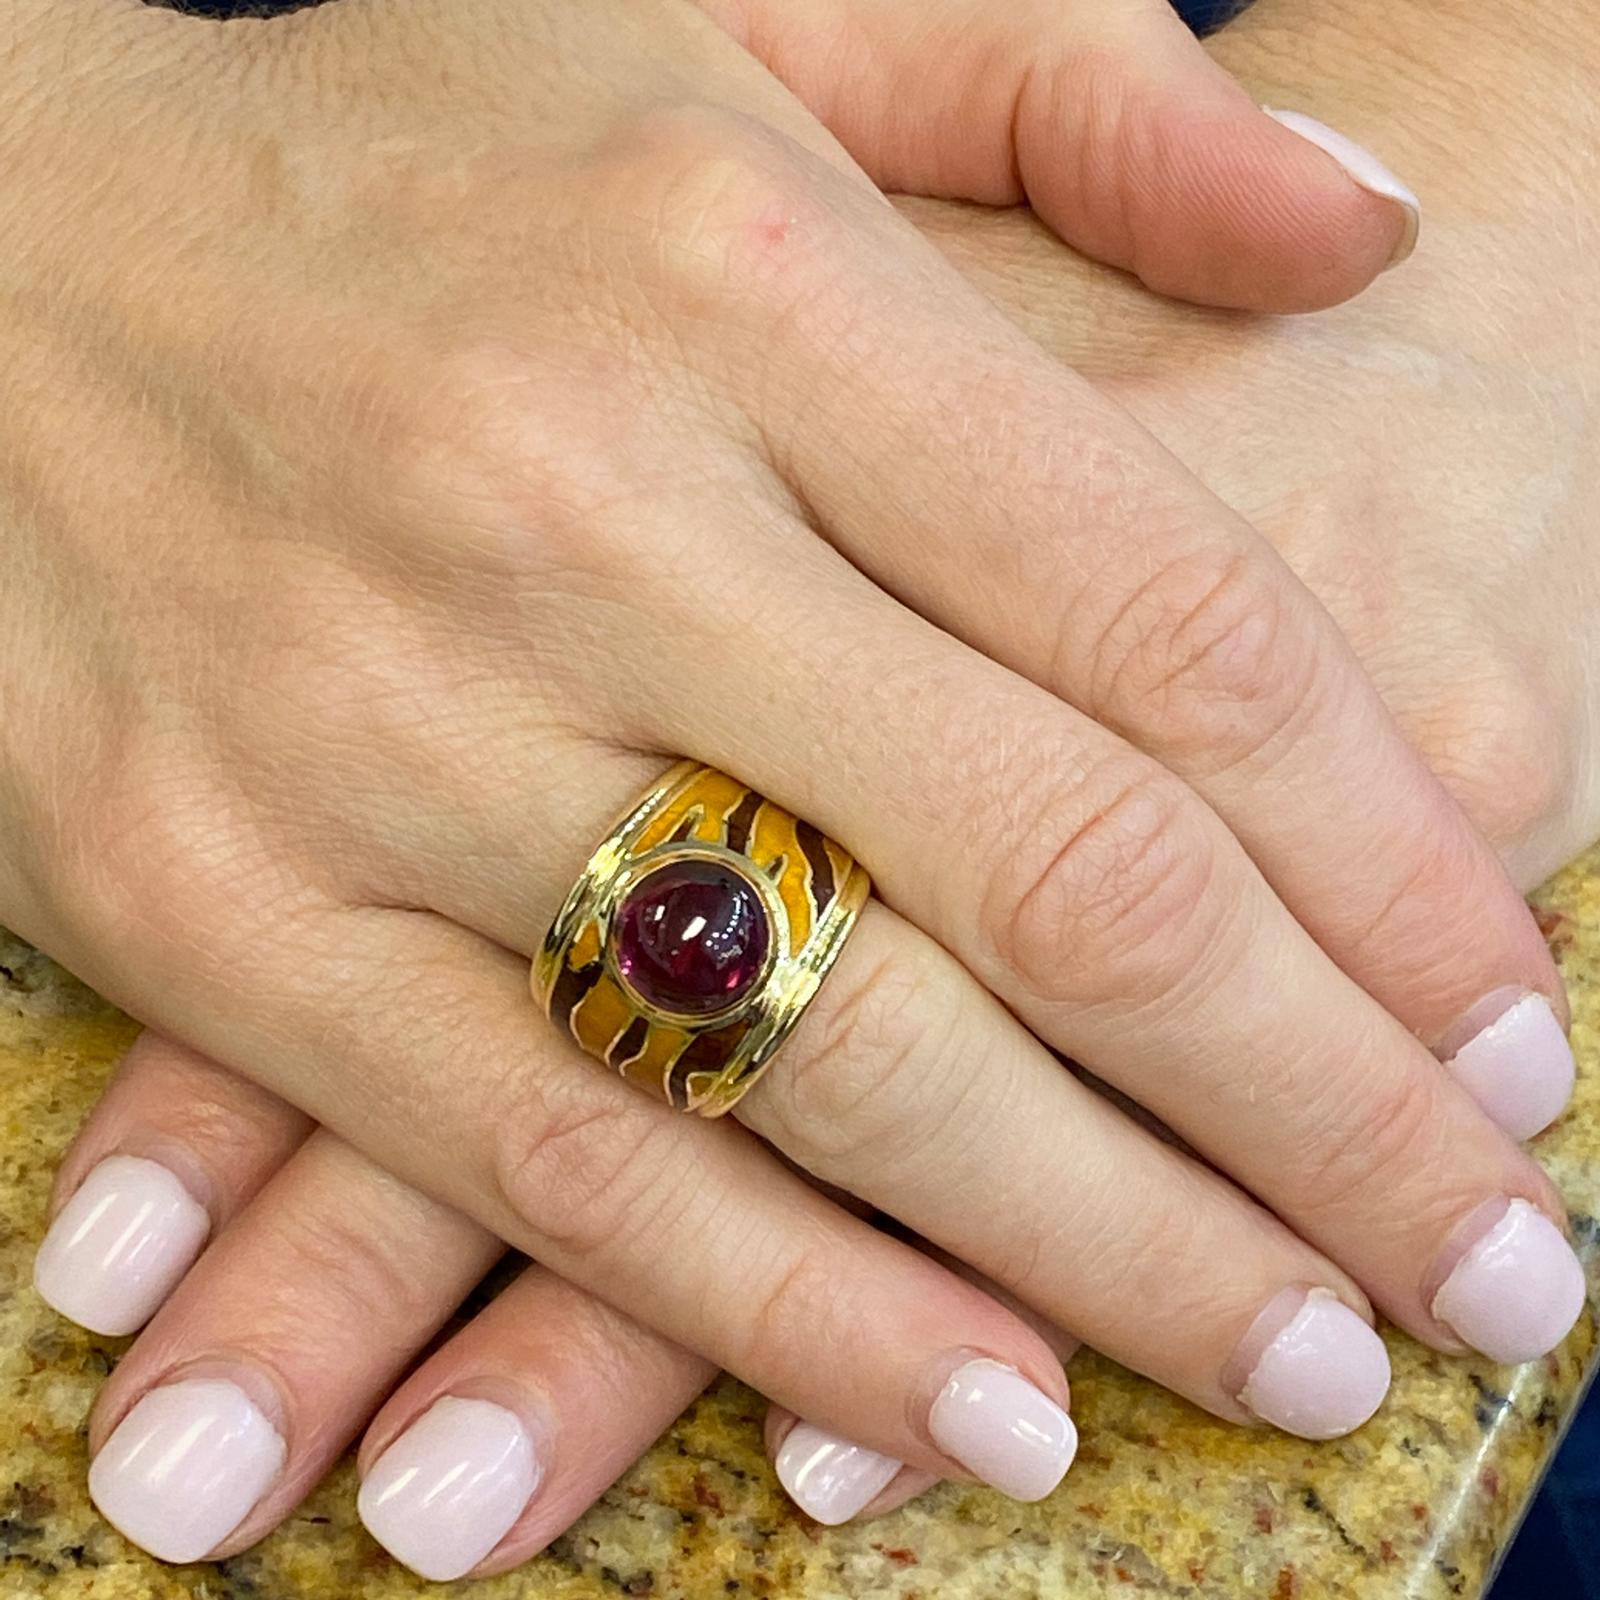 Fabulous enamel rhodolite gemstone ring by designer H. Stern. The wide band features tiger pattern enamel and a bezel set cabochon rhodolite garnet gemstone weighing approximately 4.45 carats. The band measures .75 inches in width and is currently